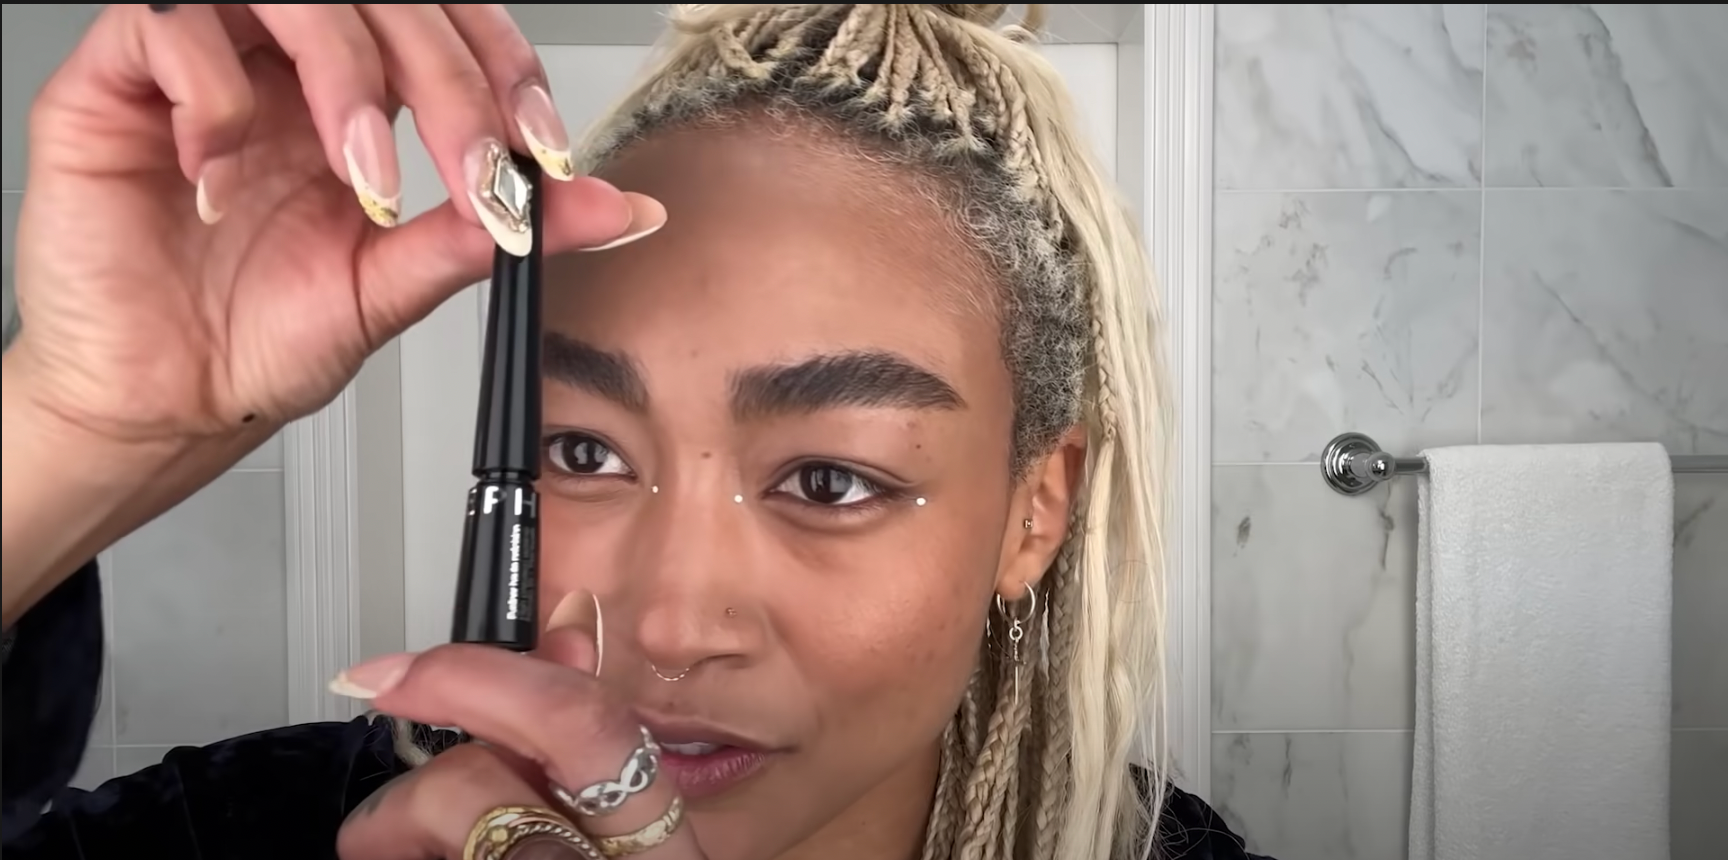 Tati Gabrielle on Wellness, Bold Makeup, and What It Takes to Play a TV  Villain